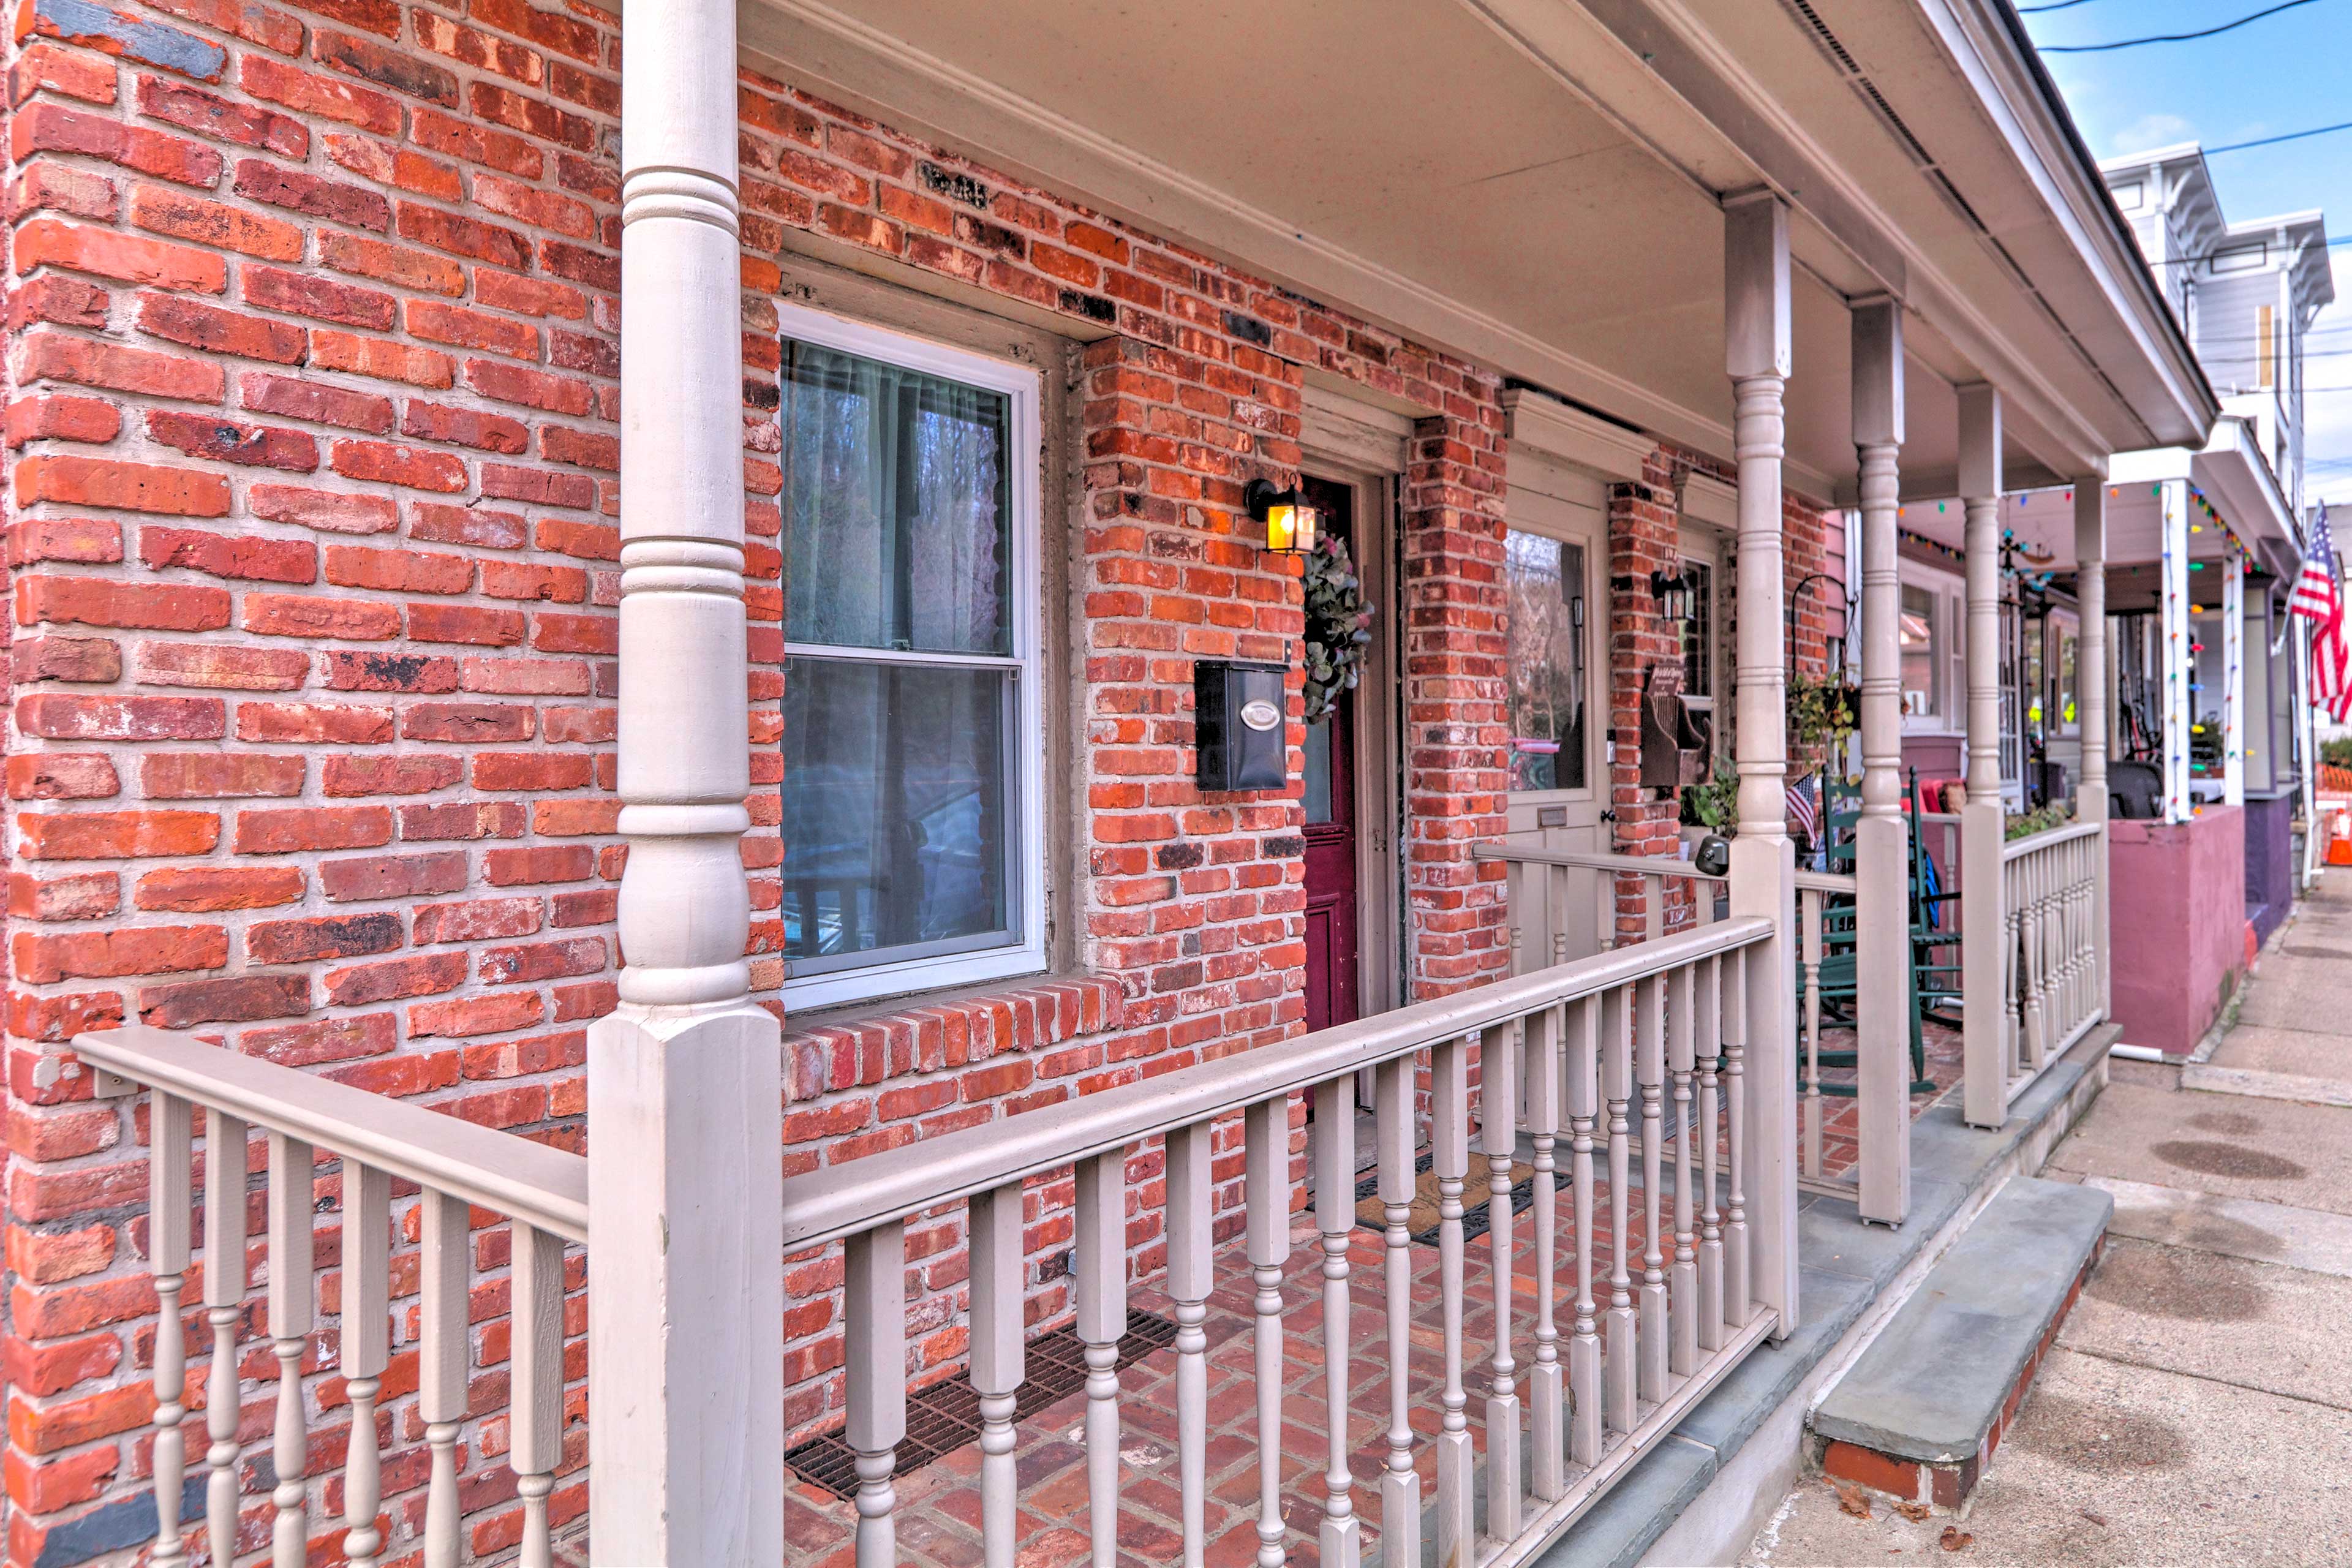 Cozy Lambertville Abode in the Heart of Downtown!